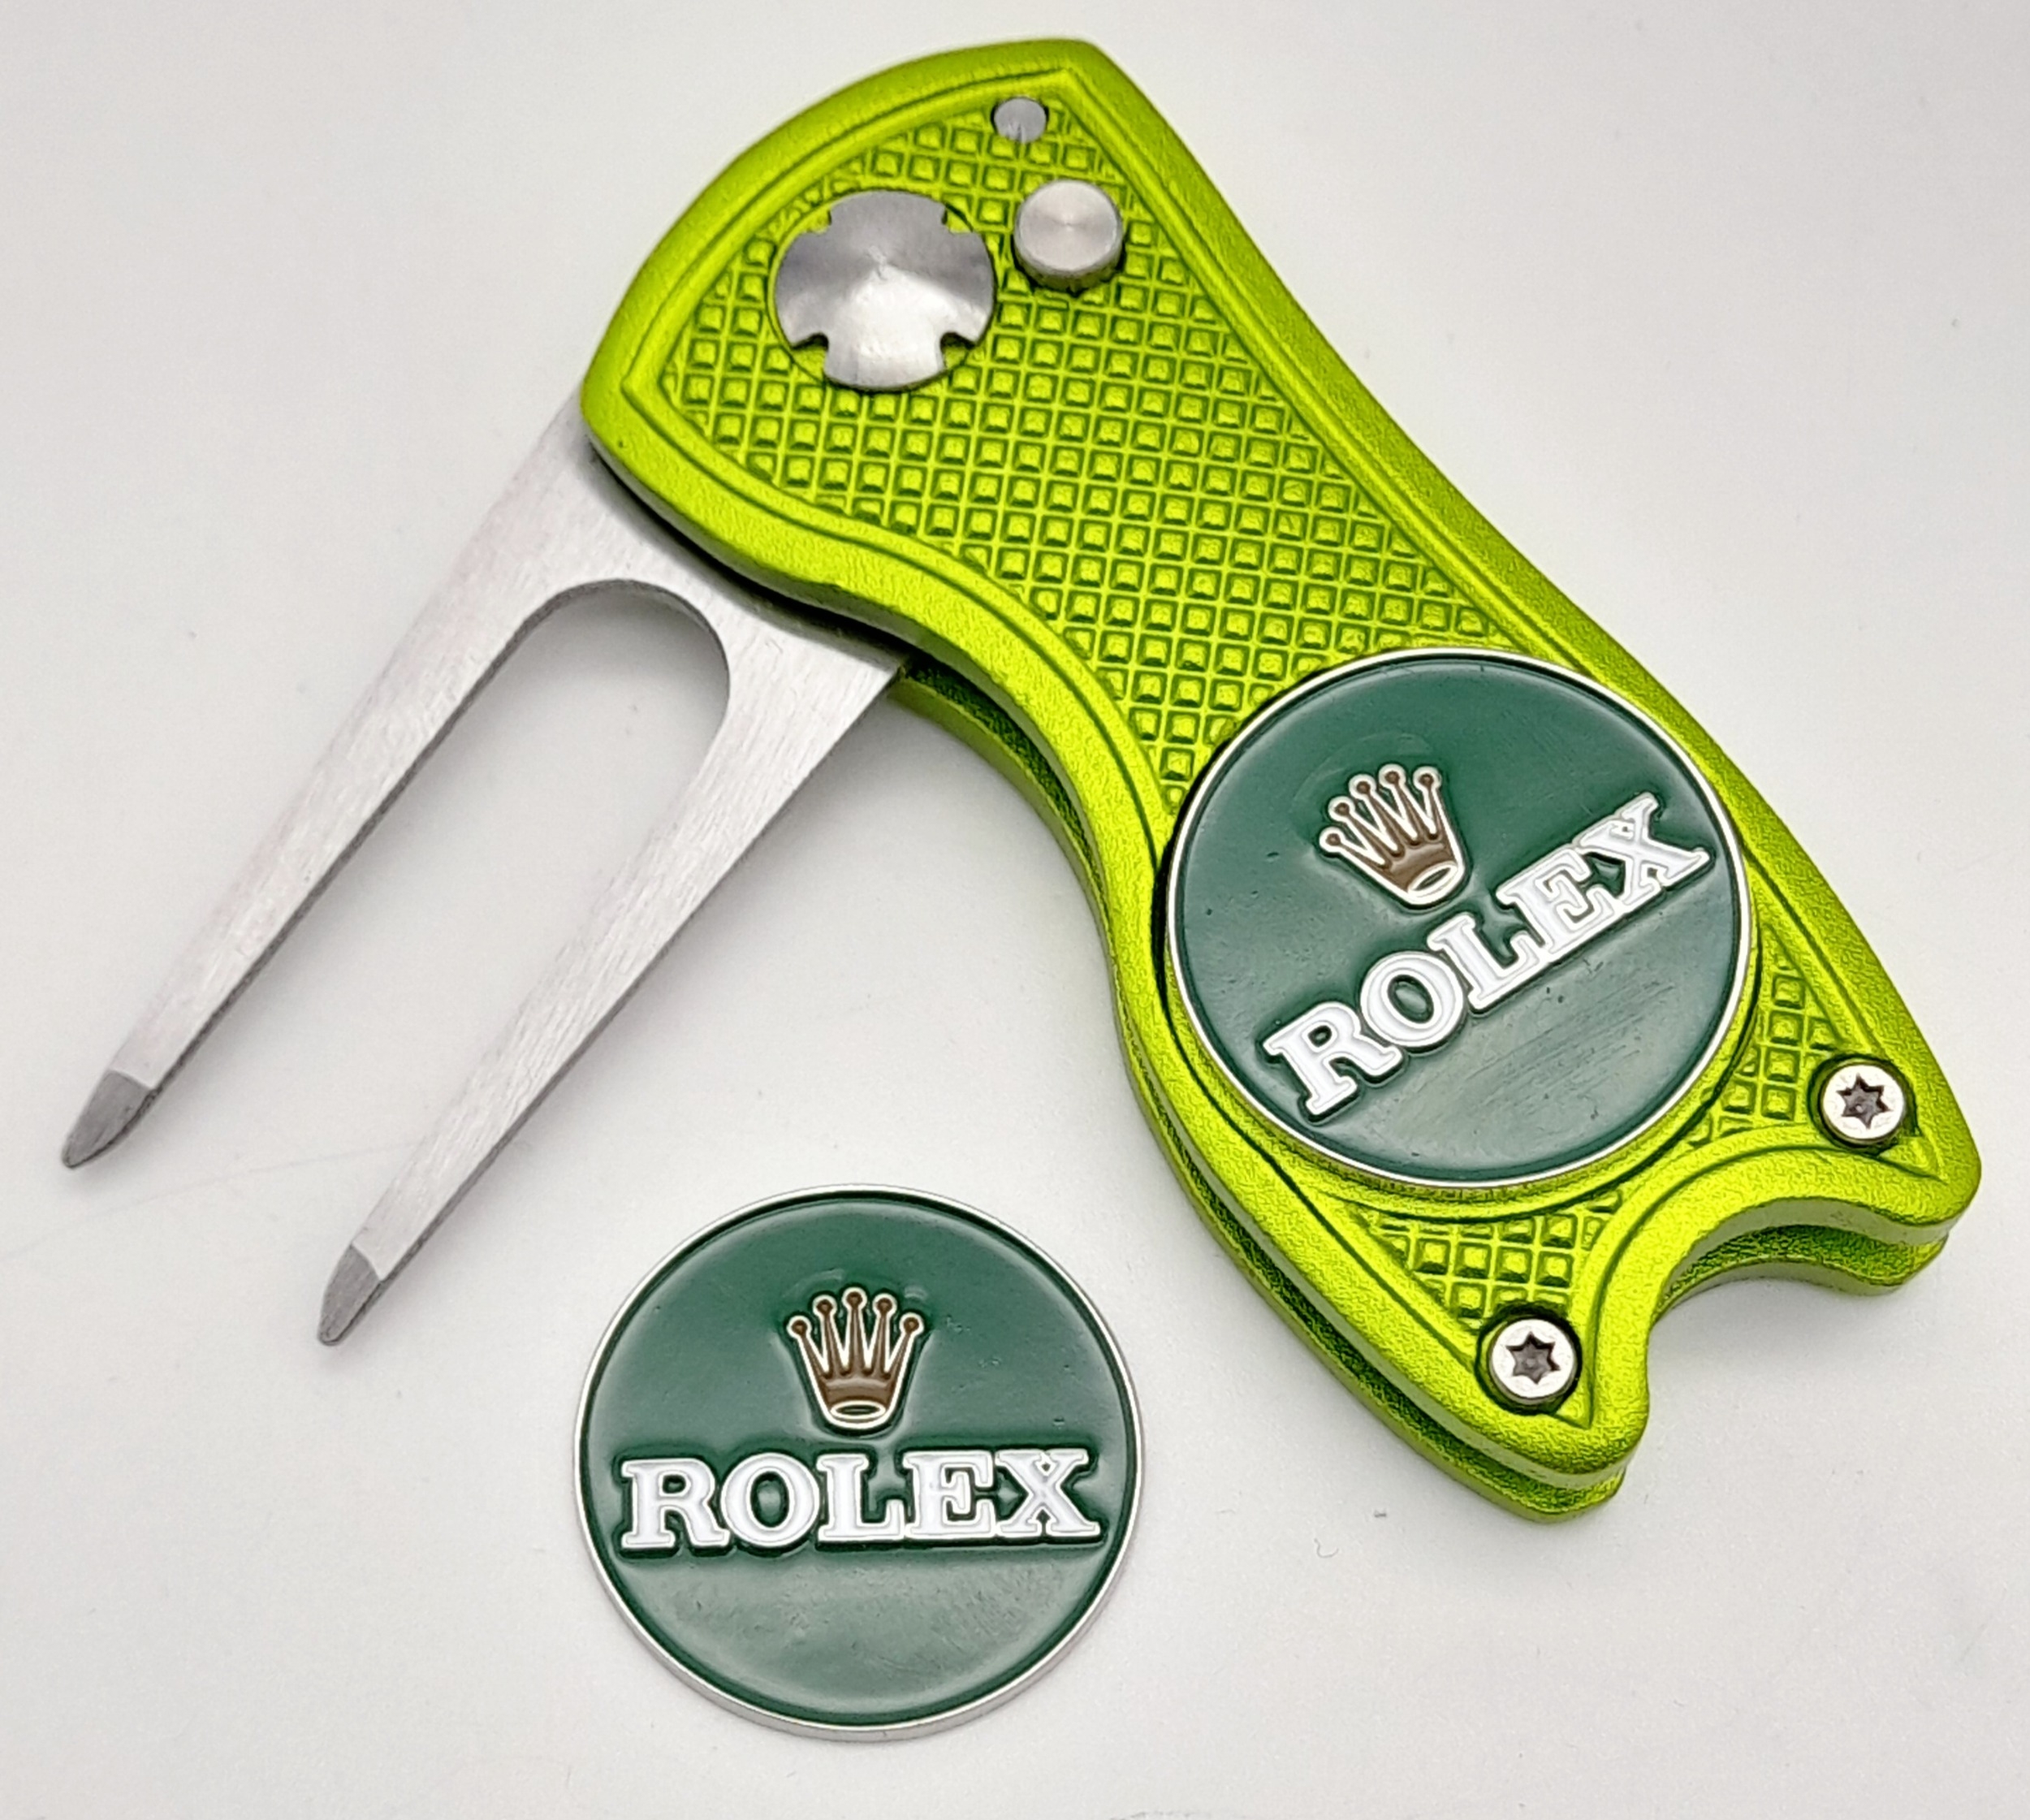 A Rolex Branded Retractable 'Flick' Golf Putting Divot Repair Tool. Removable magnetic ball marker -